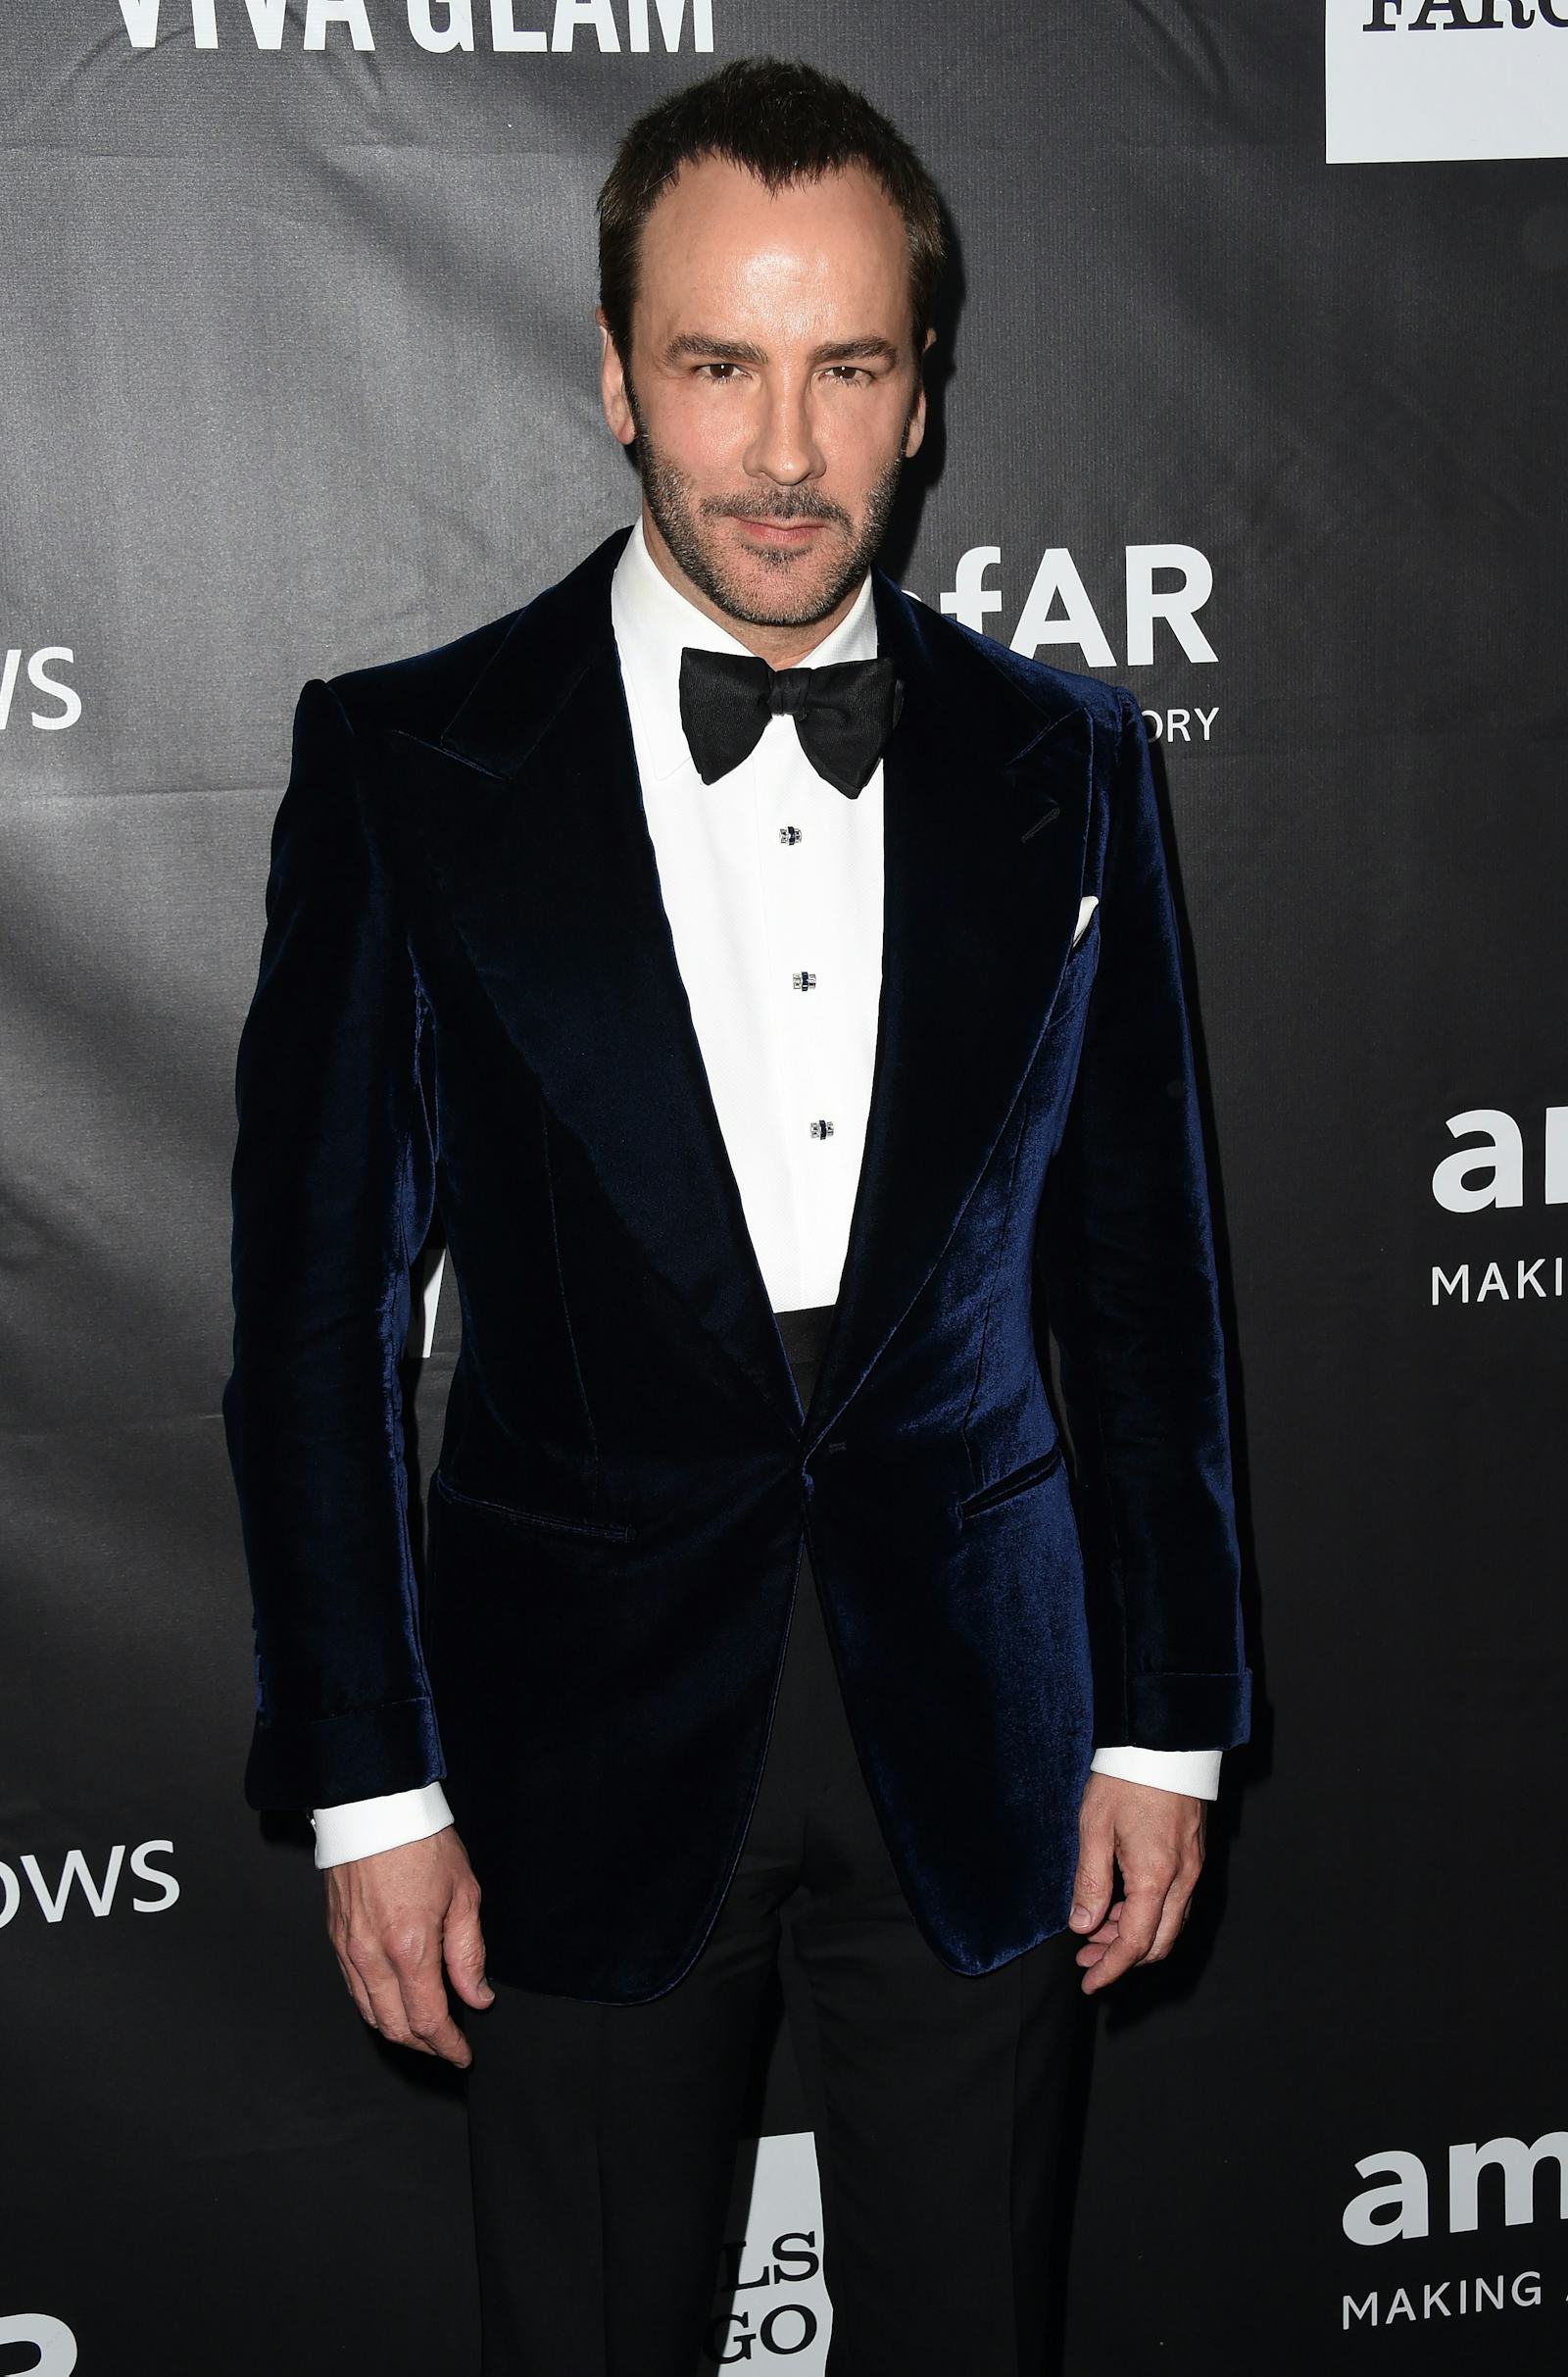 Tom Ford Says Awards Show Dresses Should Make Women Look Slim and ...